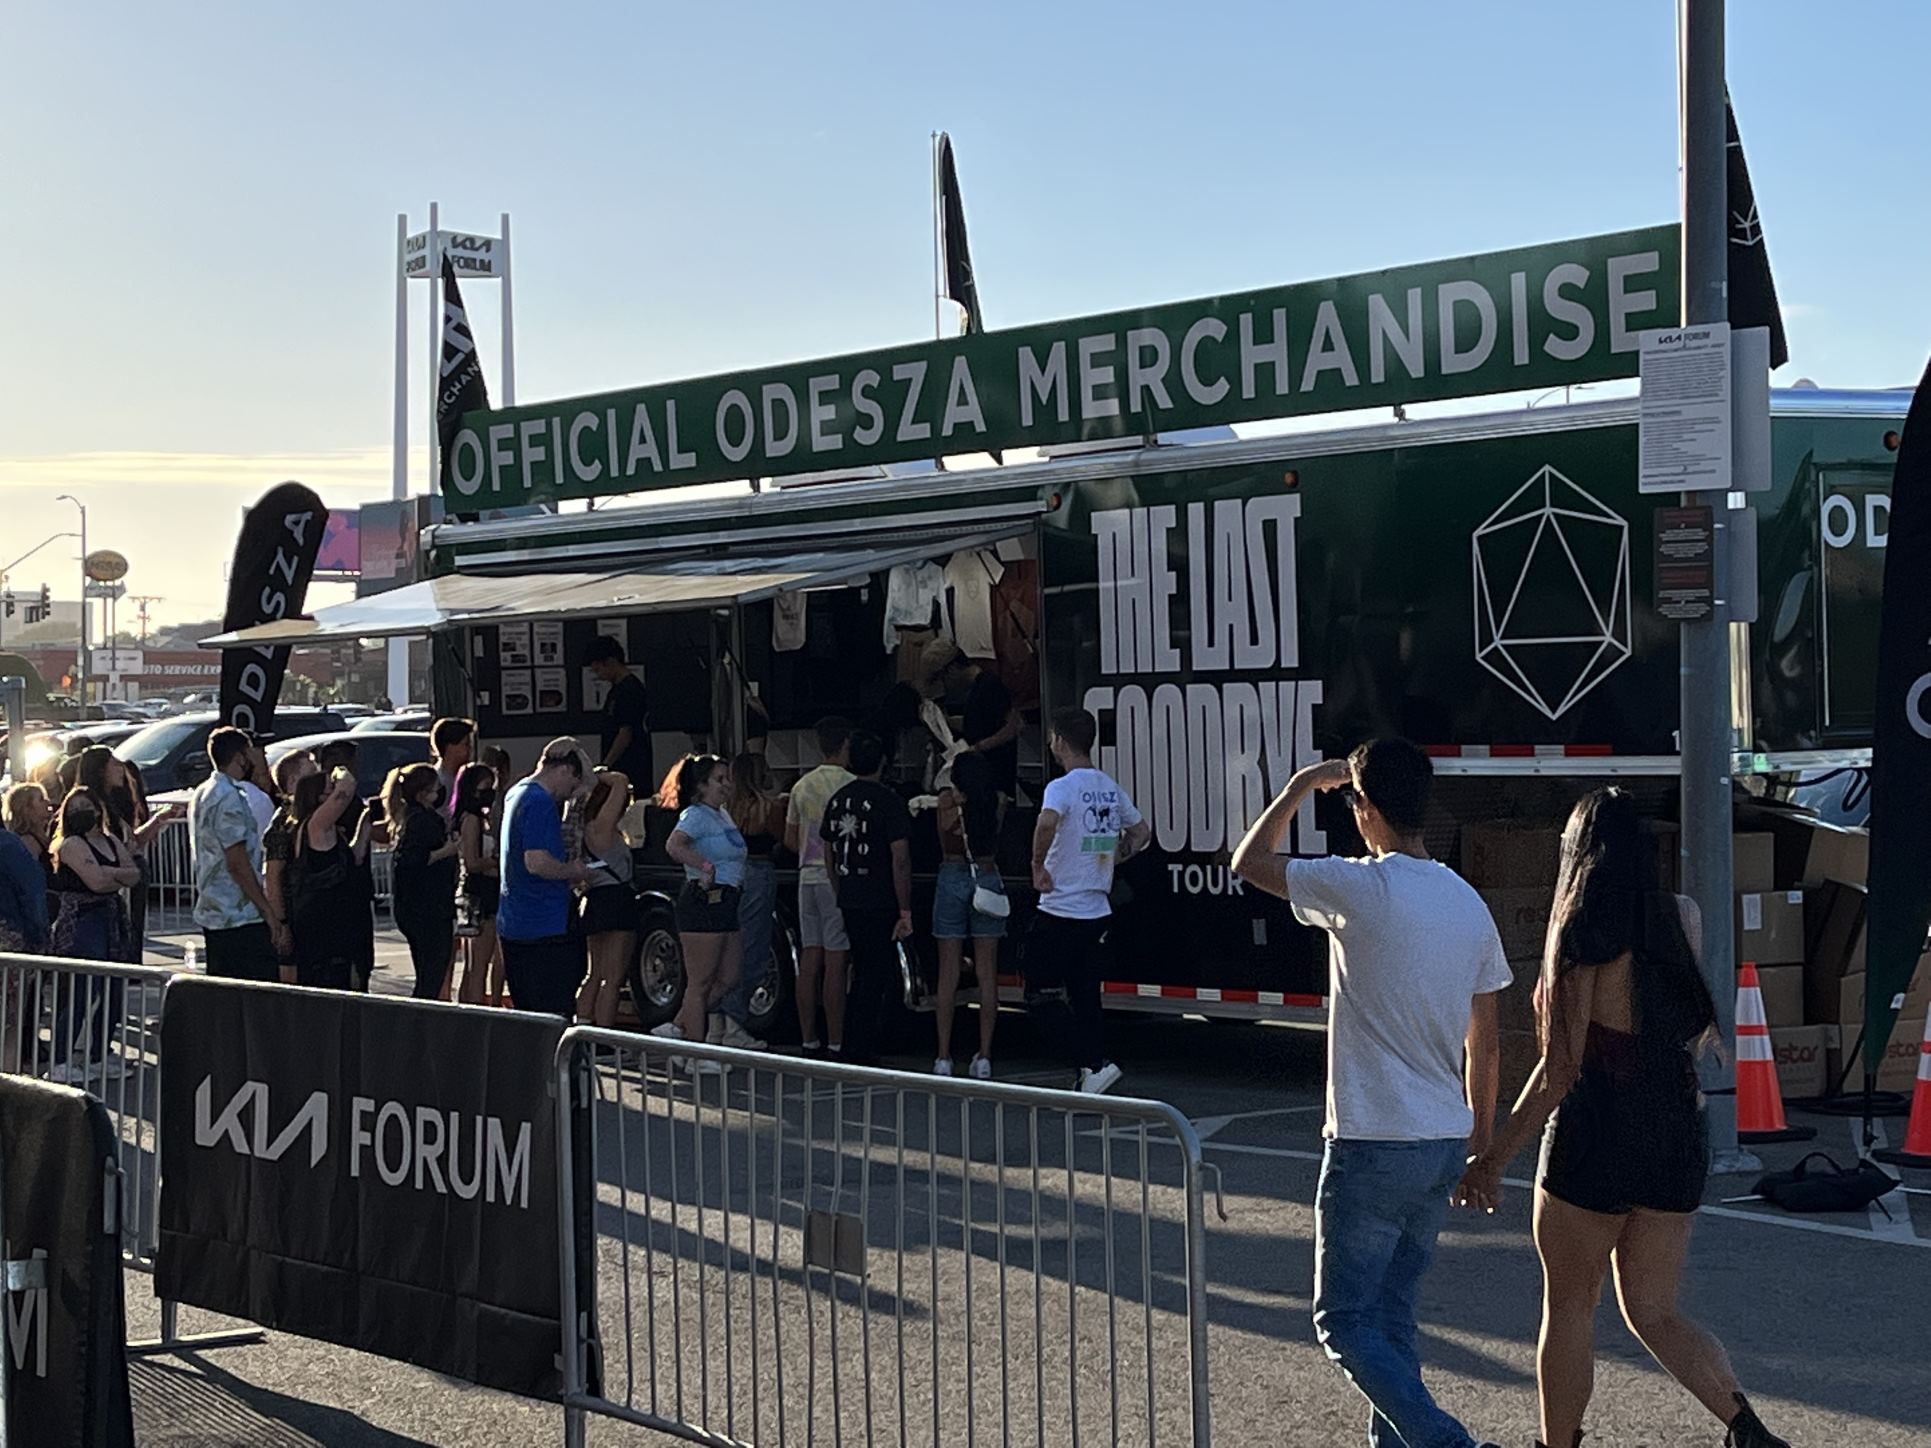 Brewco Marketing Group partnered with Red Light to design and fabricate an official mobile merchandise trailer for ODESZA